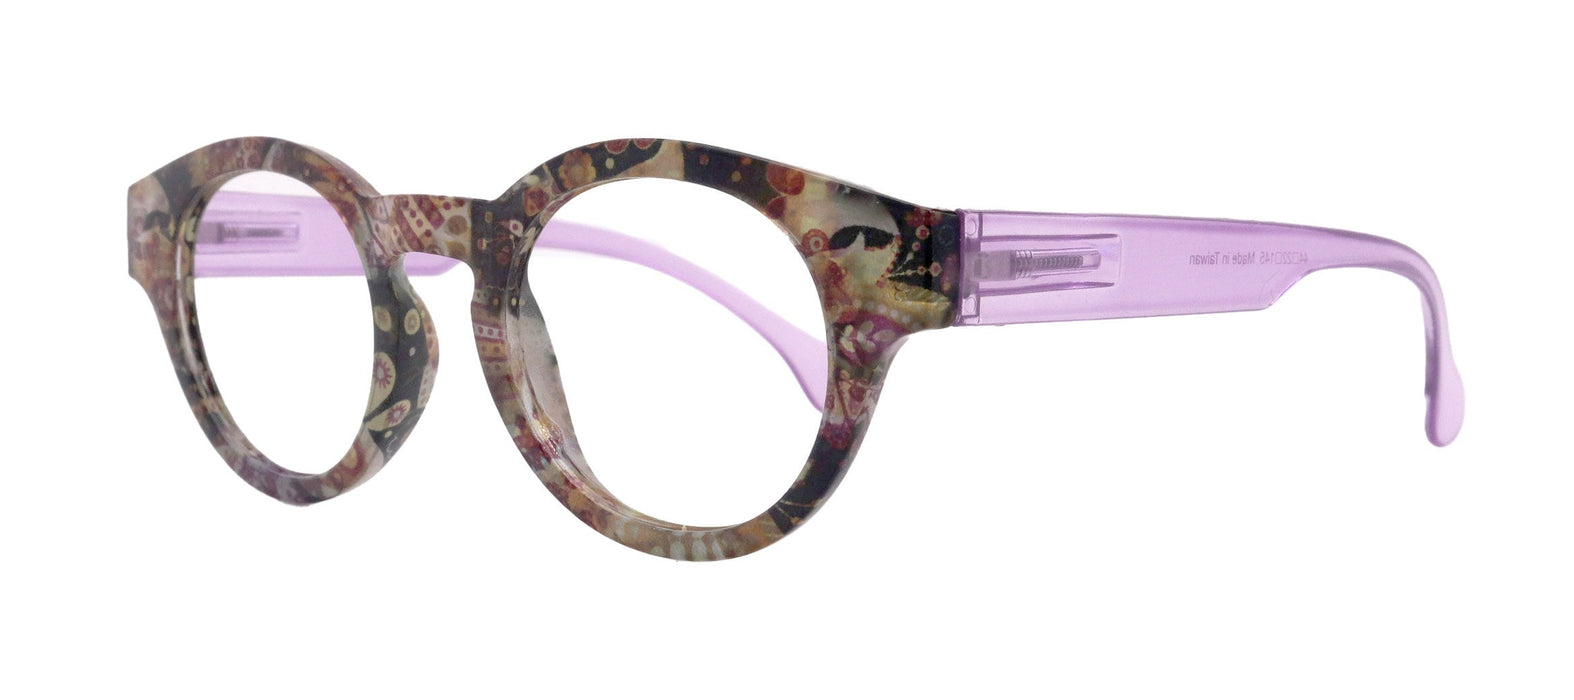 Premium Reading Glasses High End Readers +1.25 .. +3.00 (Purple Paisley ) Round Optical Frames. NY Fifth Avenue.